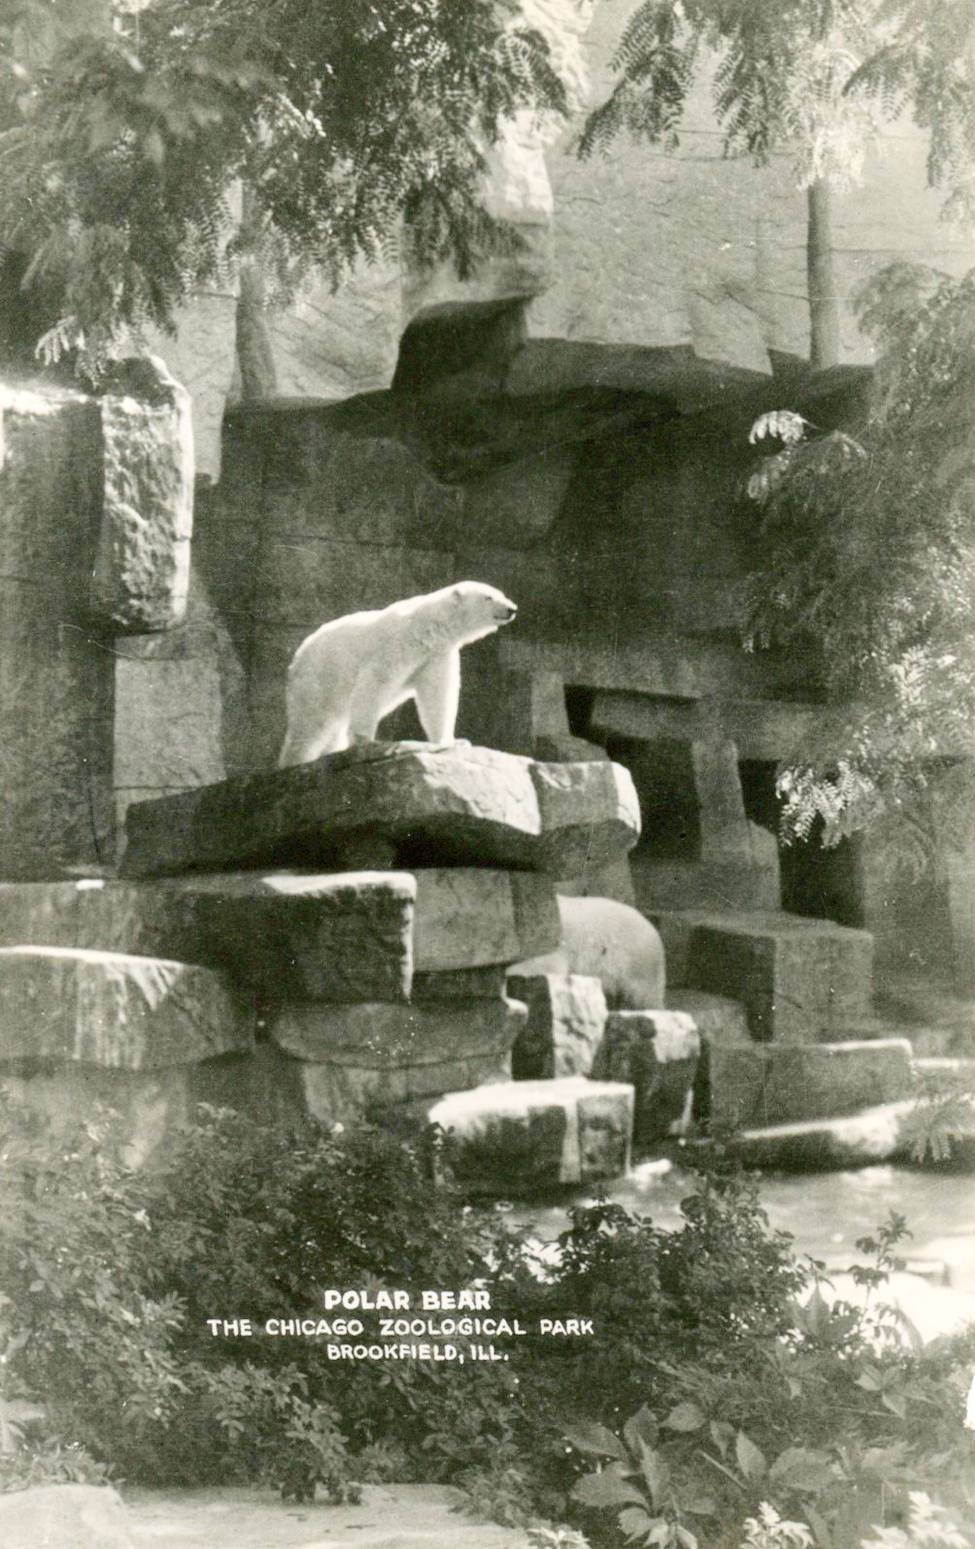 POSTCARD - CHICAGO - BROOKFIELD ZOO - CHICAGO ZOOLOGICAL PARK - POLAR BEAR AT TOP OF ROCKS - c1940